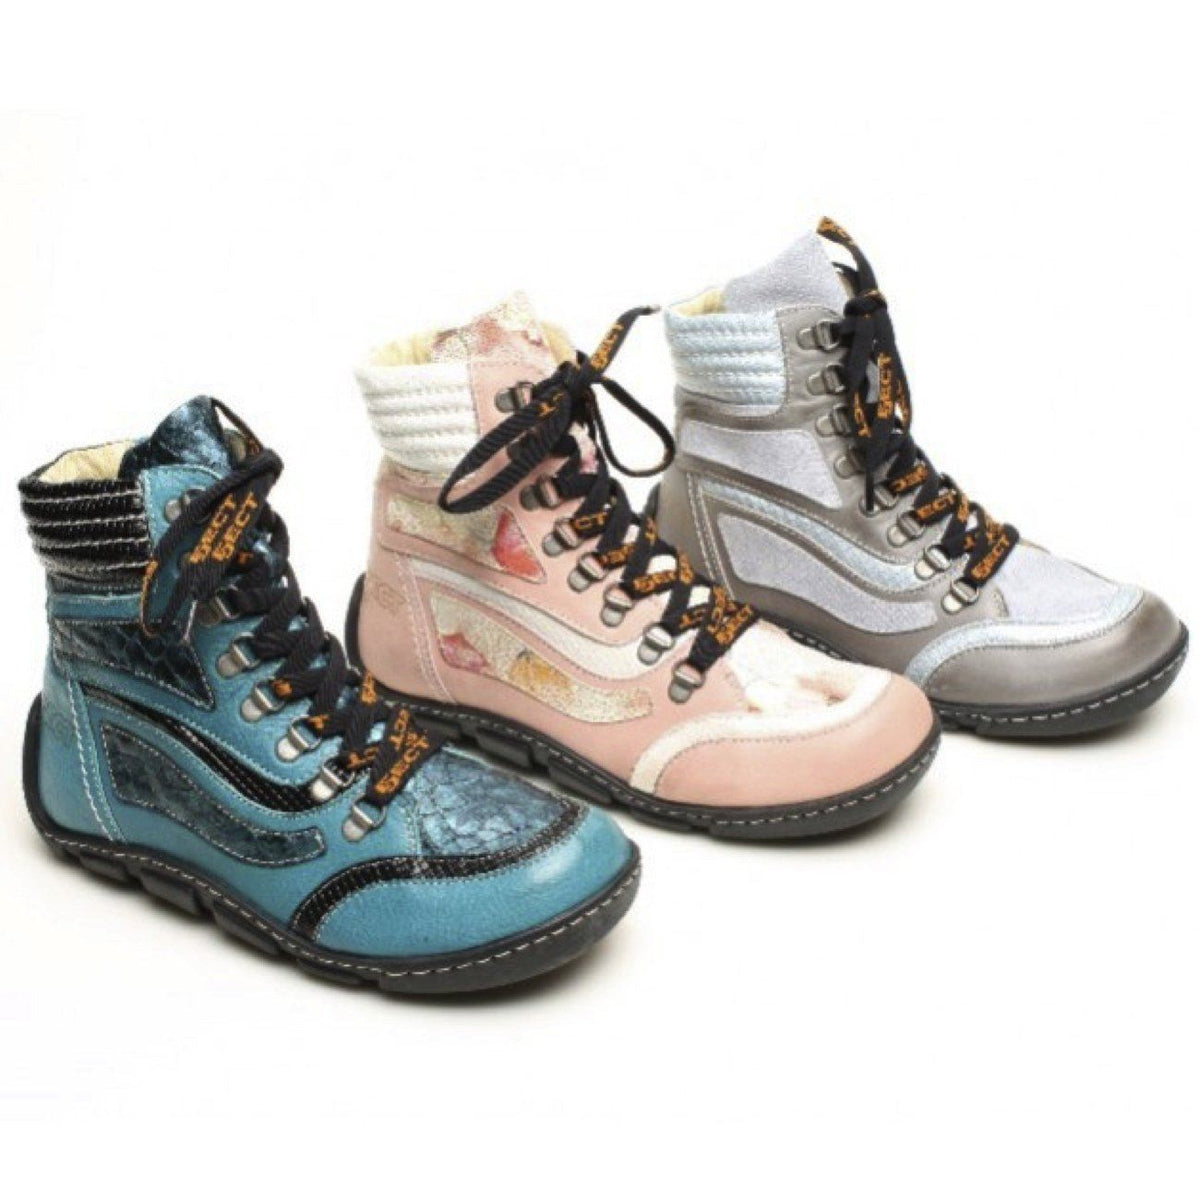 Eject, EJW21-01, Shoes, Leather, Lt Pink Combo Shoes Eject 